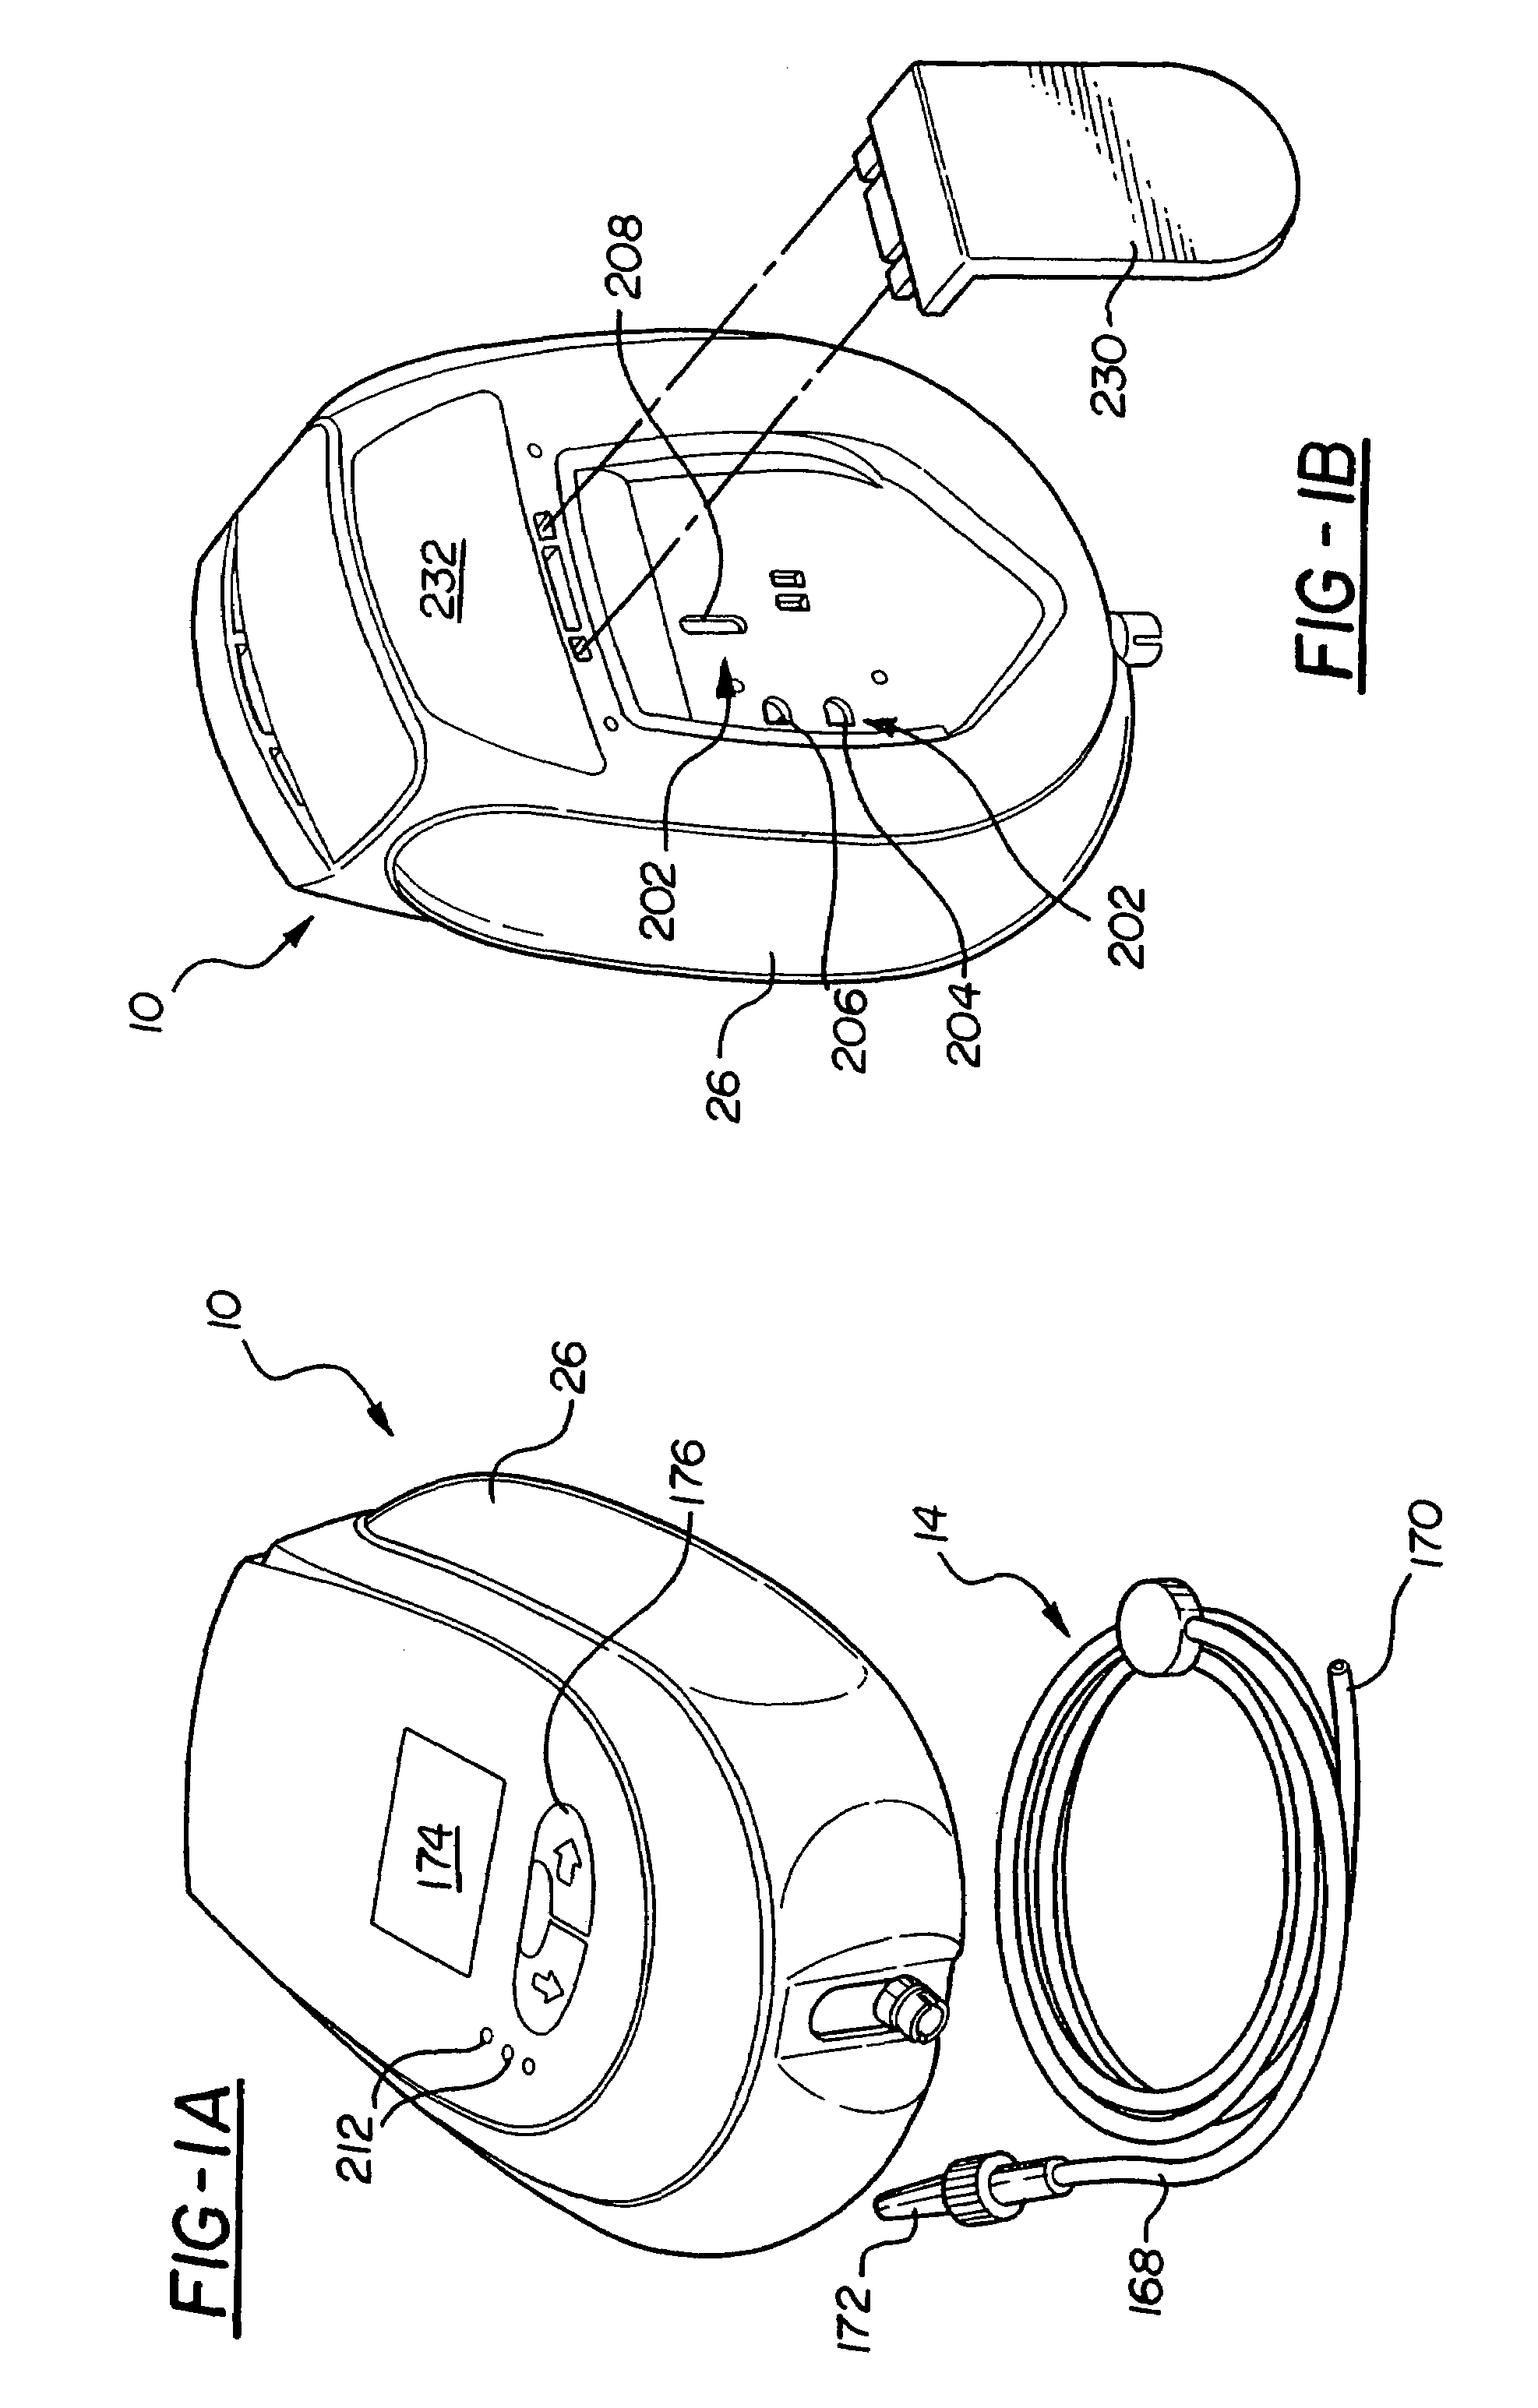 Pump assembly for an integrated medication delivery system